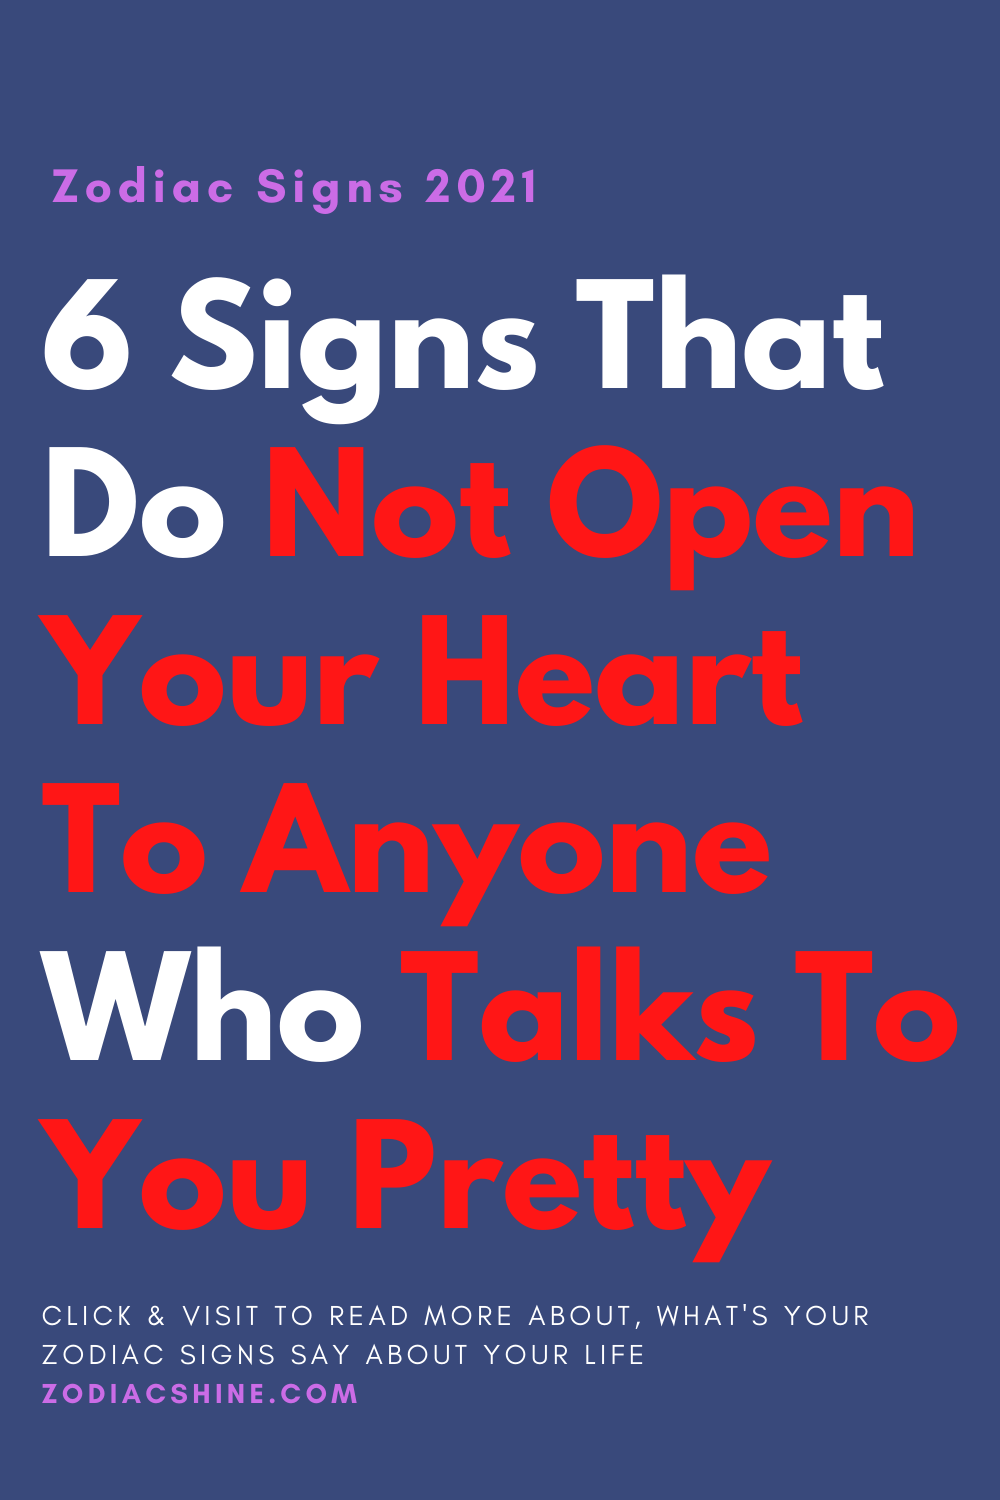 6 Signs That Do Not Open Your Heart To Anyone Who Talks To You Pretty